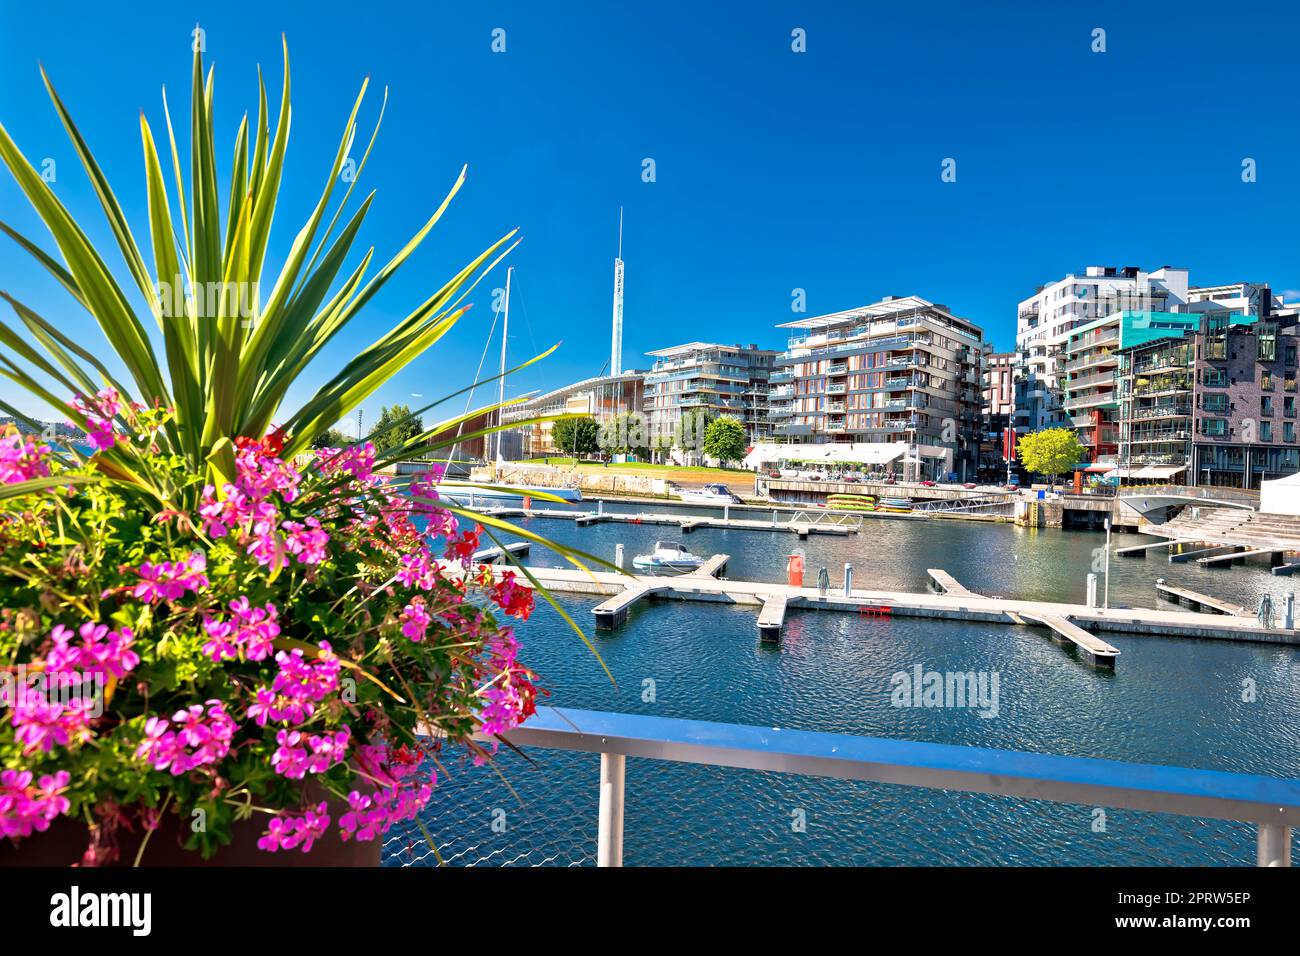 Scenic Aker Brygge marina nad modern waterfront architecture in Oslo view Stock Photo